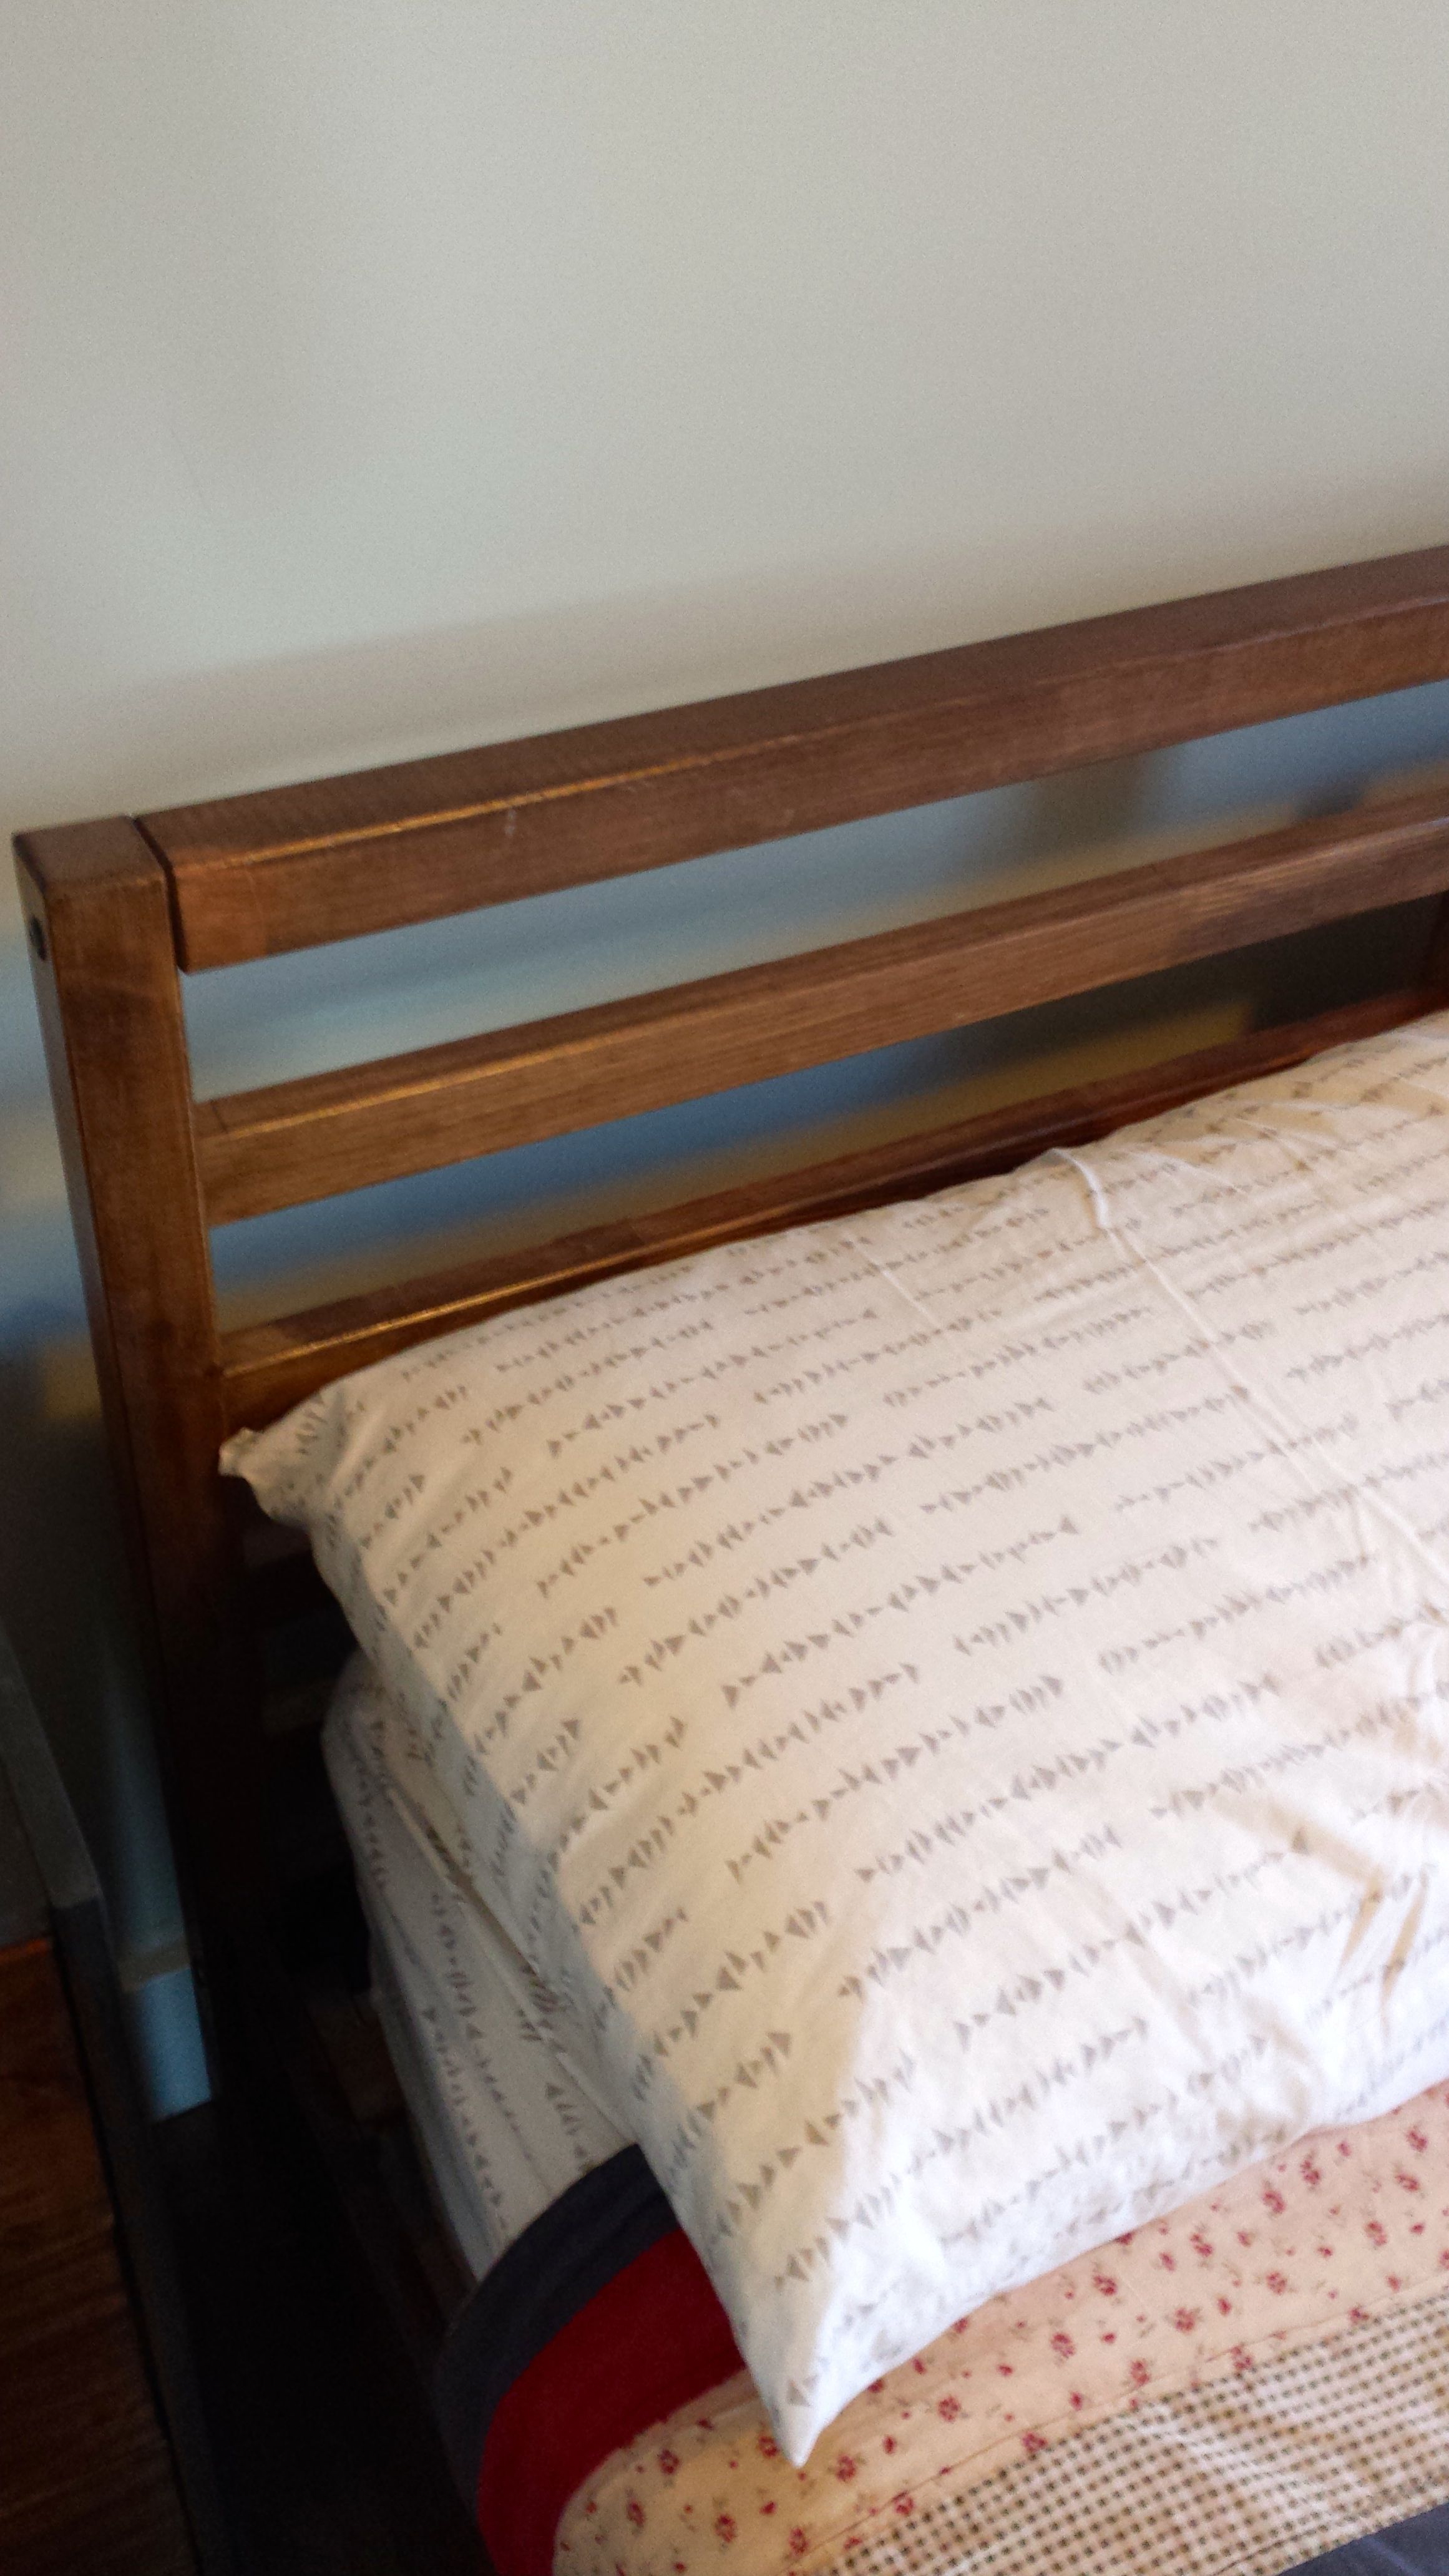 Finished stained pine bed frame DIY project